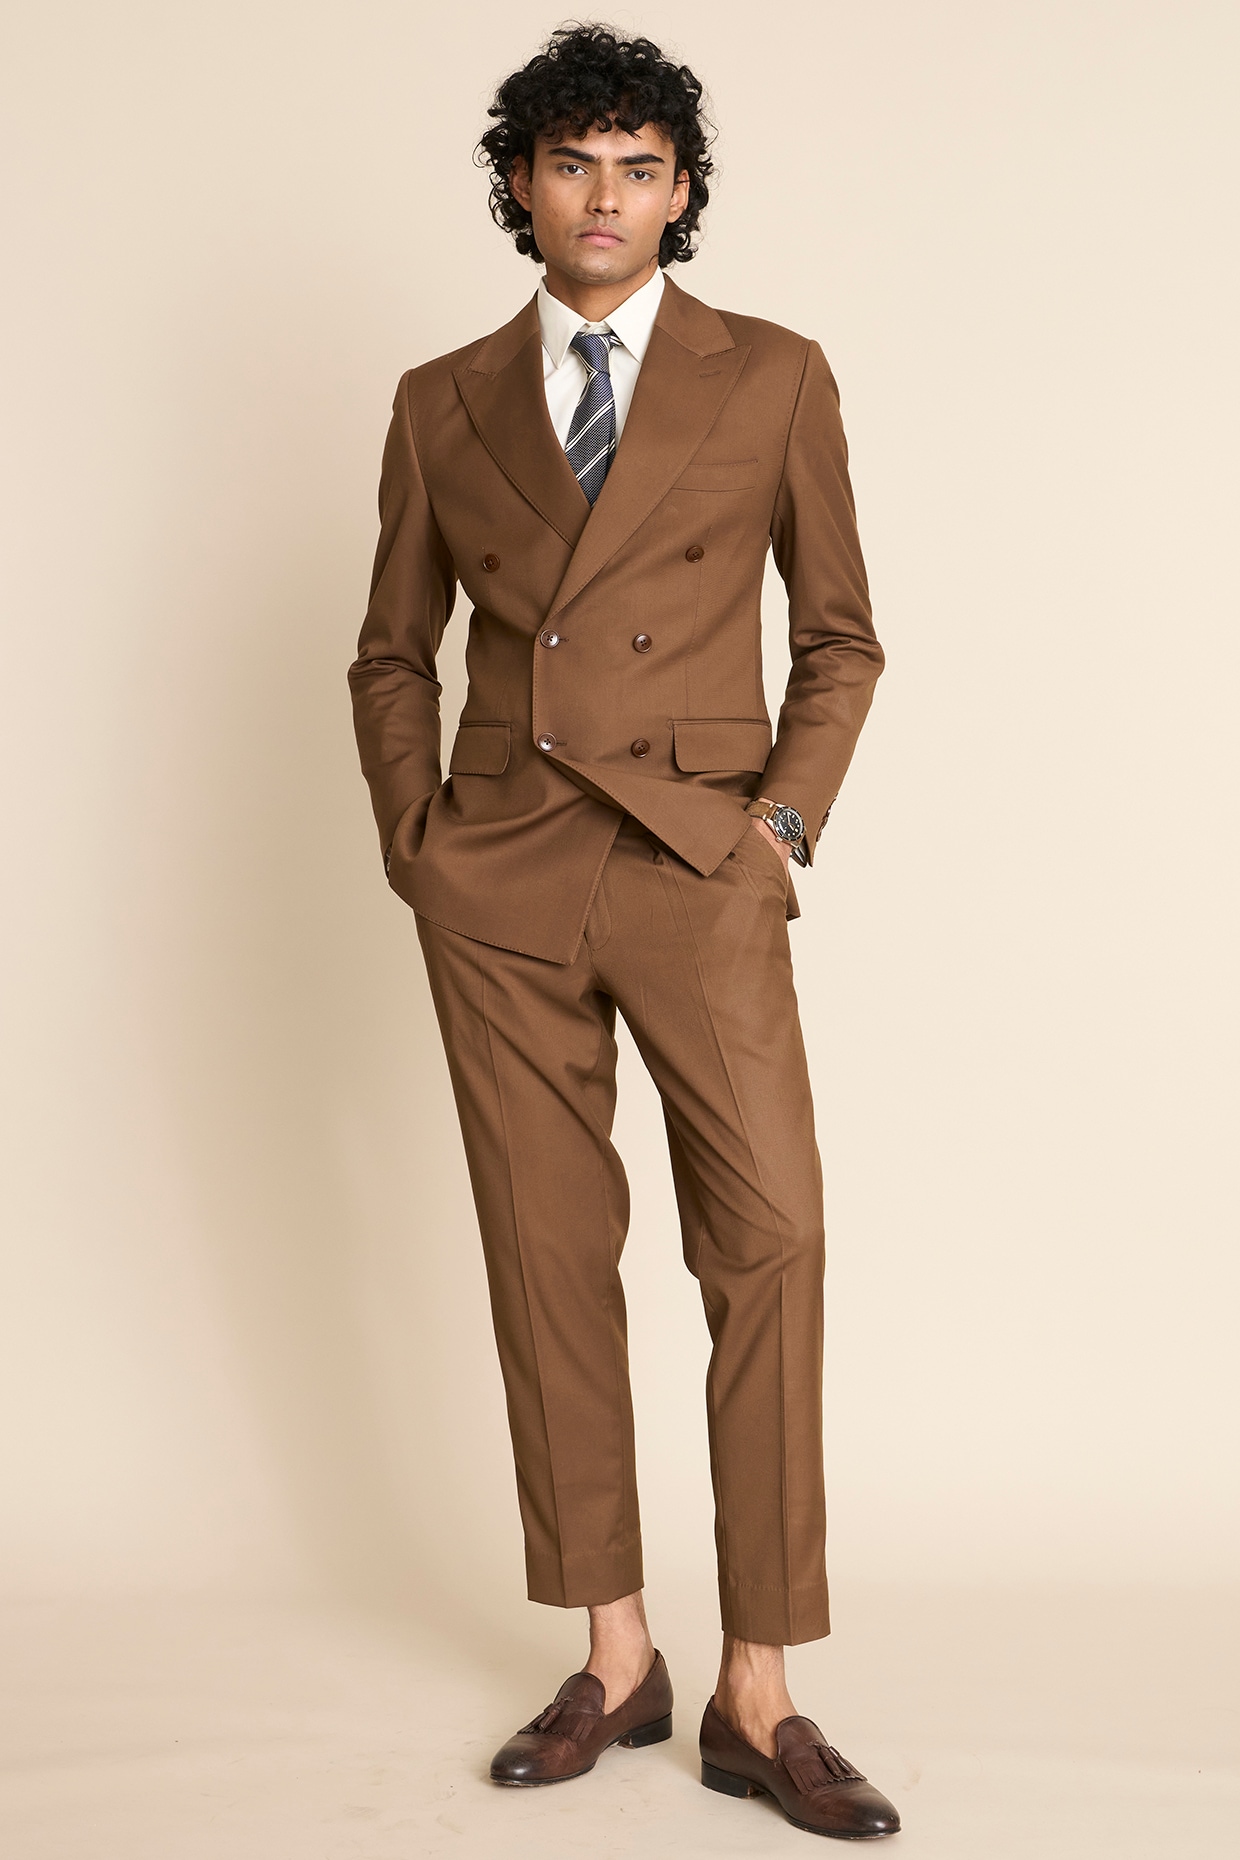 9 Suit Colors For A Man's Wardrobe | How To Choose A Suit Color | Which Suit  Colors To Buy In Priority Order